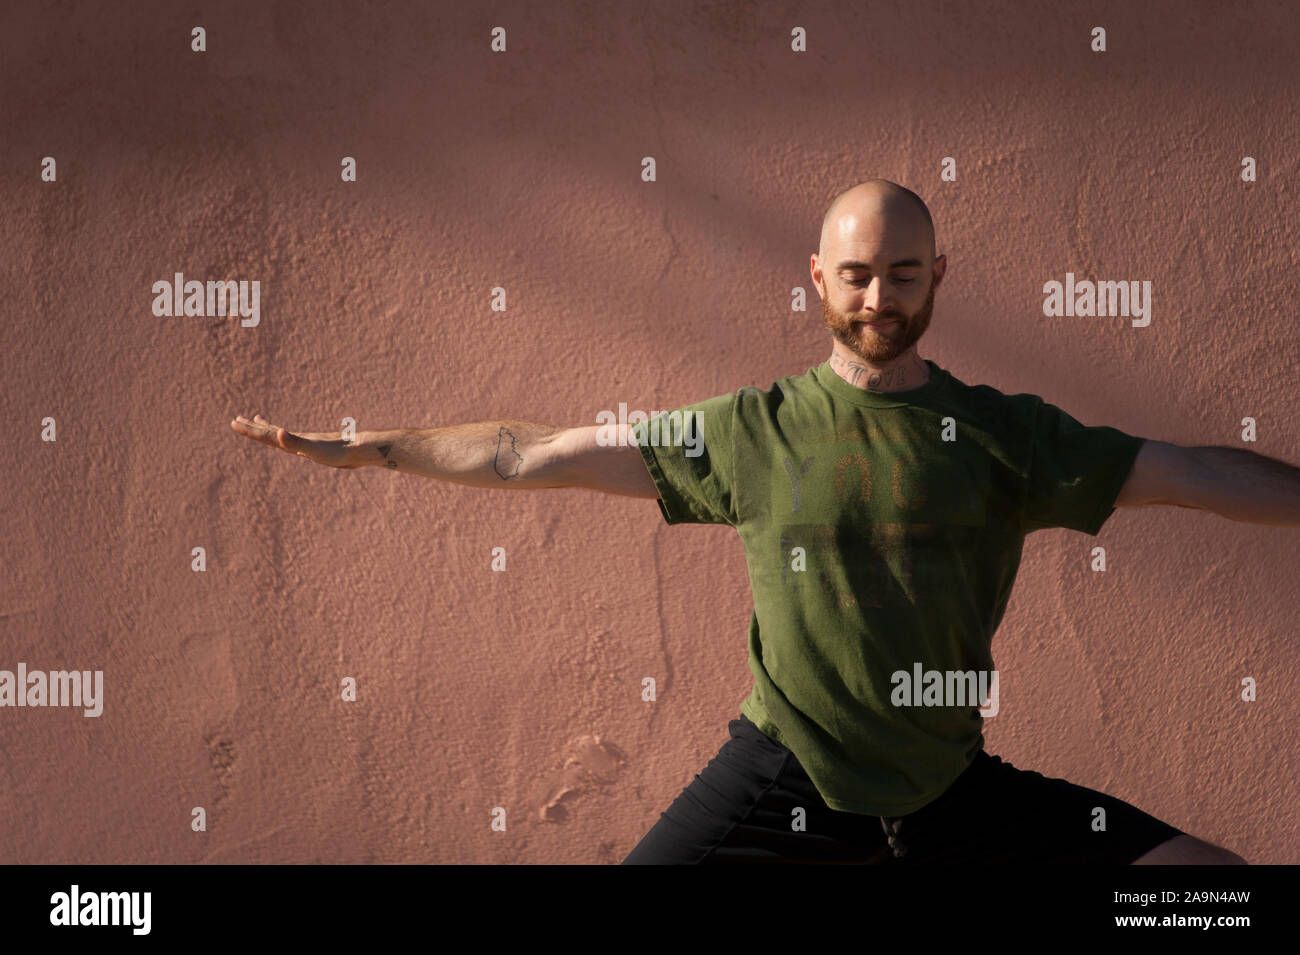 Young man in his thirties with a beard wearing a green tee shirt practicing yoga by a salmon pink colored adobe wall. Stock Photo